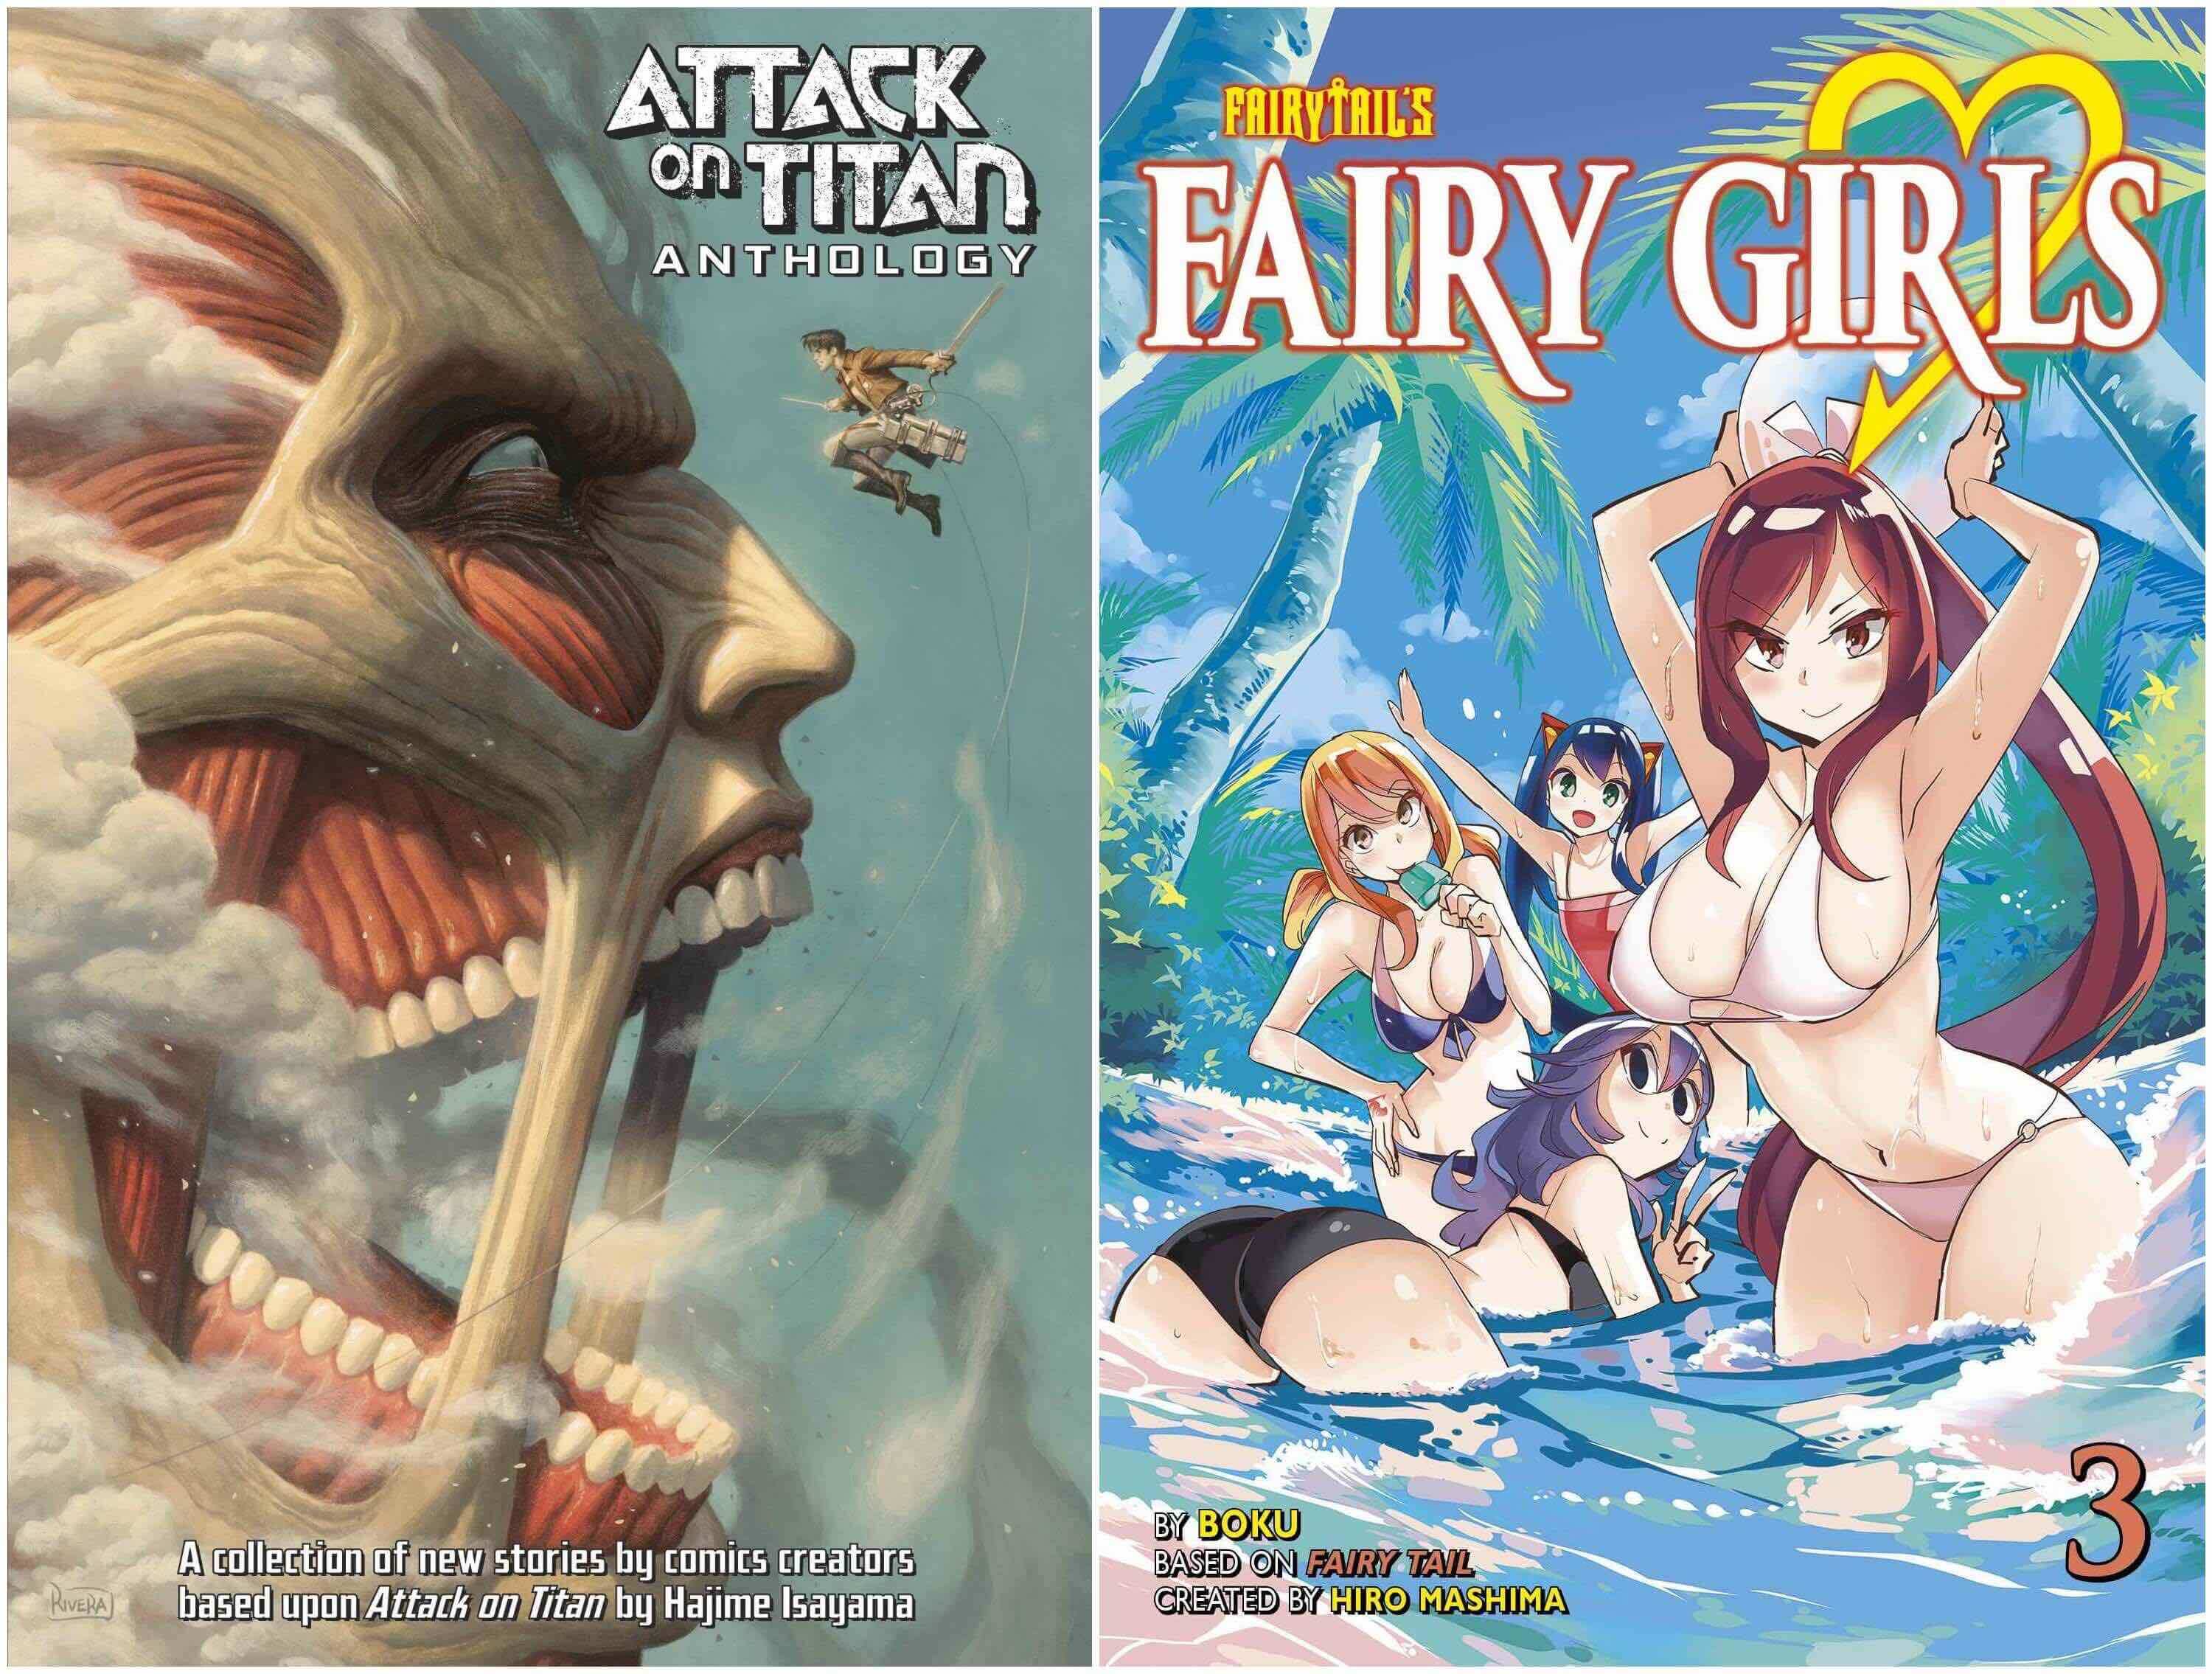 October 2016 Manga Releases Covers for Attack on Titan Anthology and Fairy Girls.